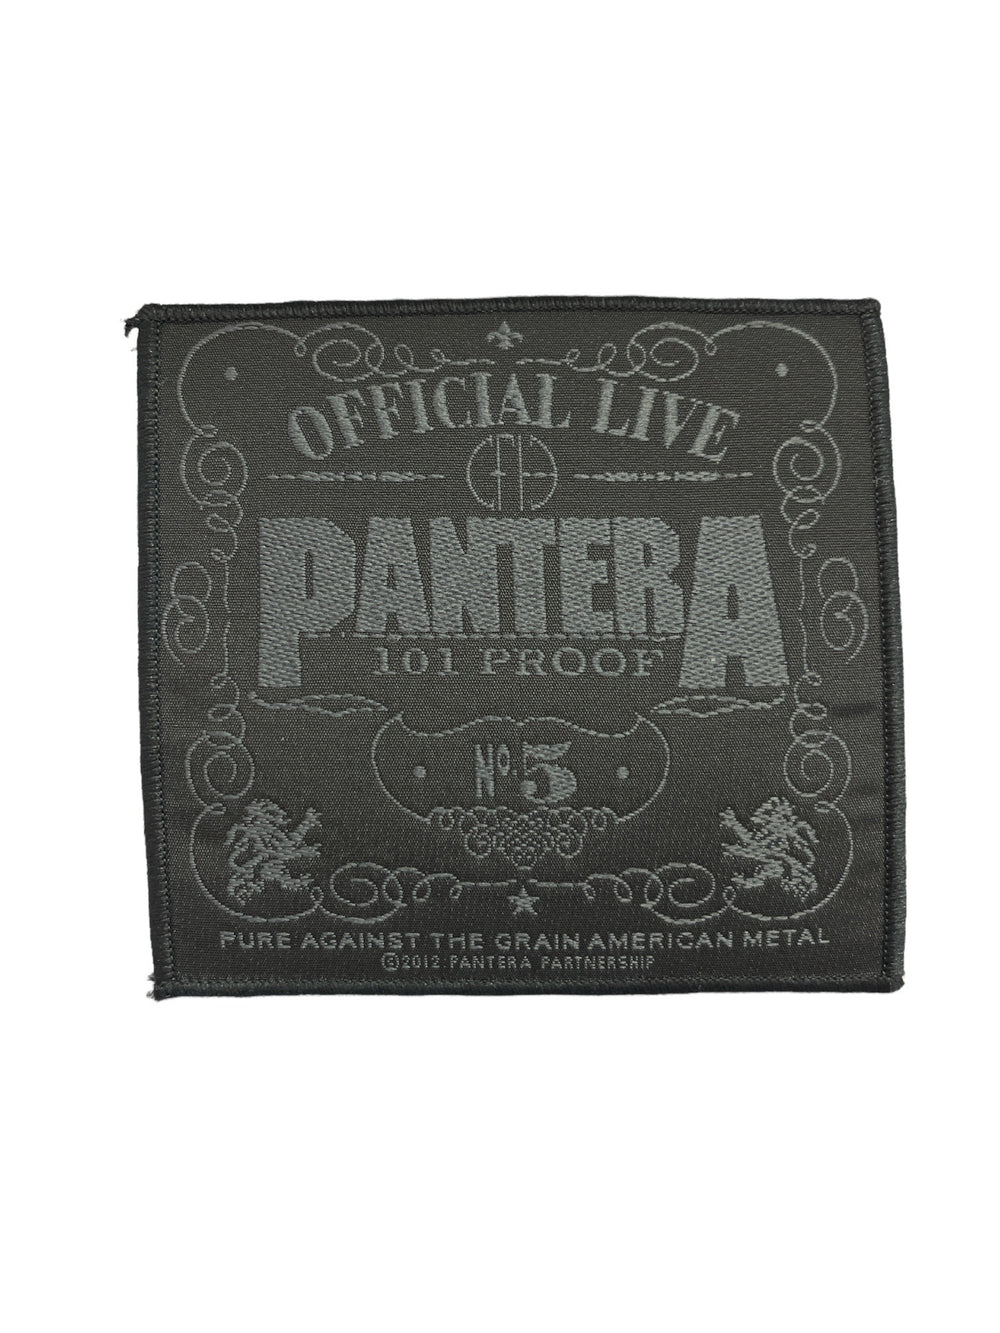 Pantera 101 Proof Square Official Woven Patch: NEW